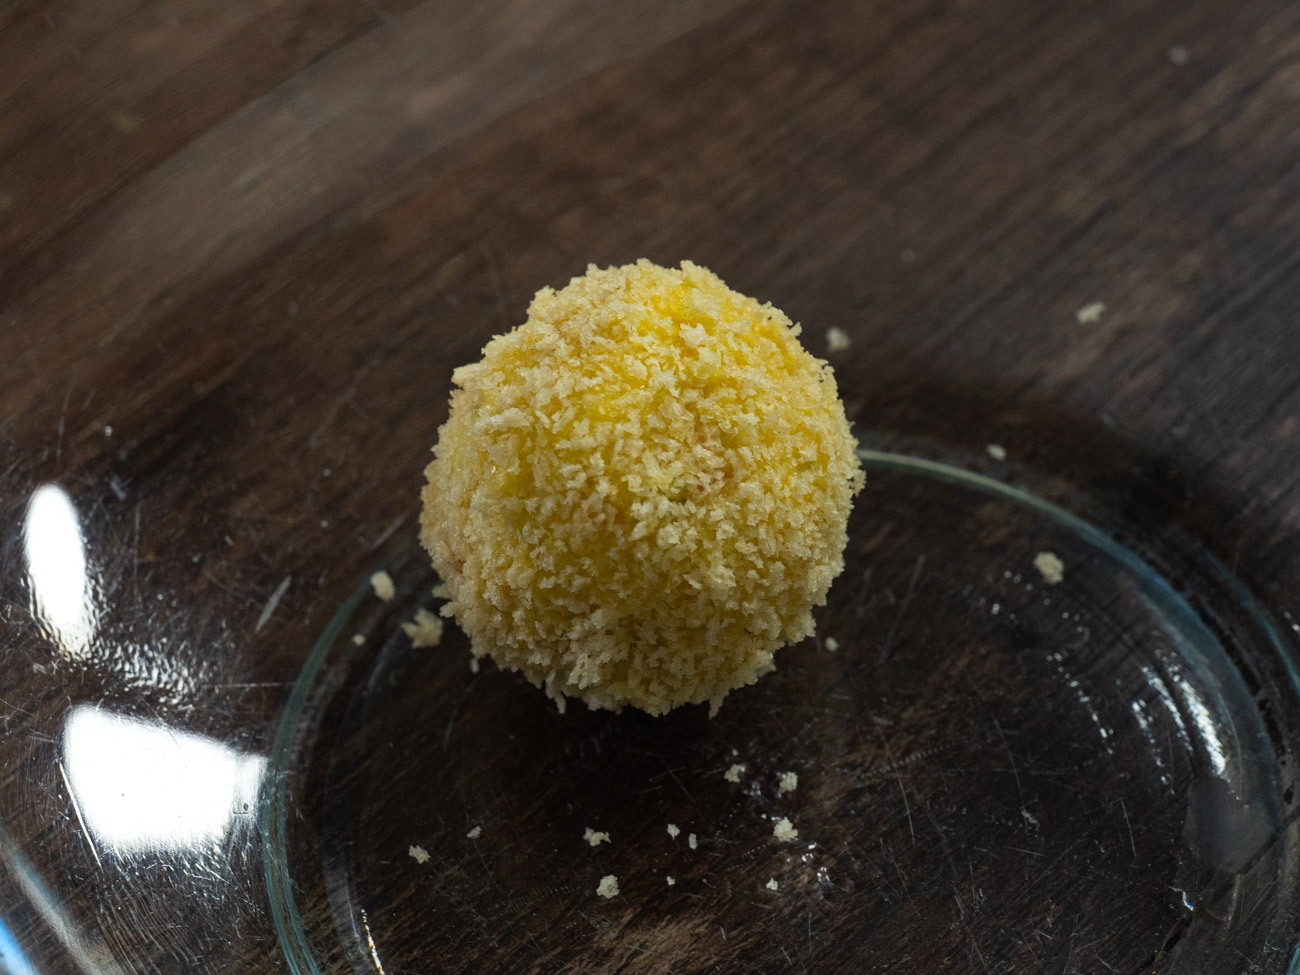 Using your hands, roll spoonfuls of the cooled grits into balls about 2 inches across. Dip fritters one at a time first into egg mixture and then into breadcrumbs before frying.